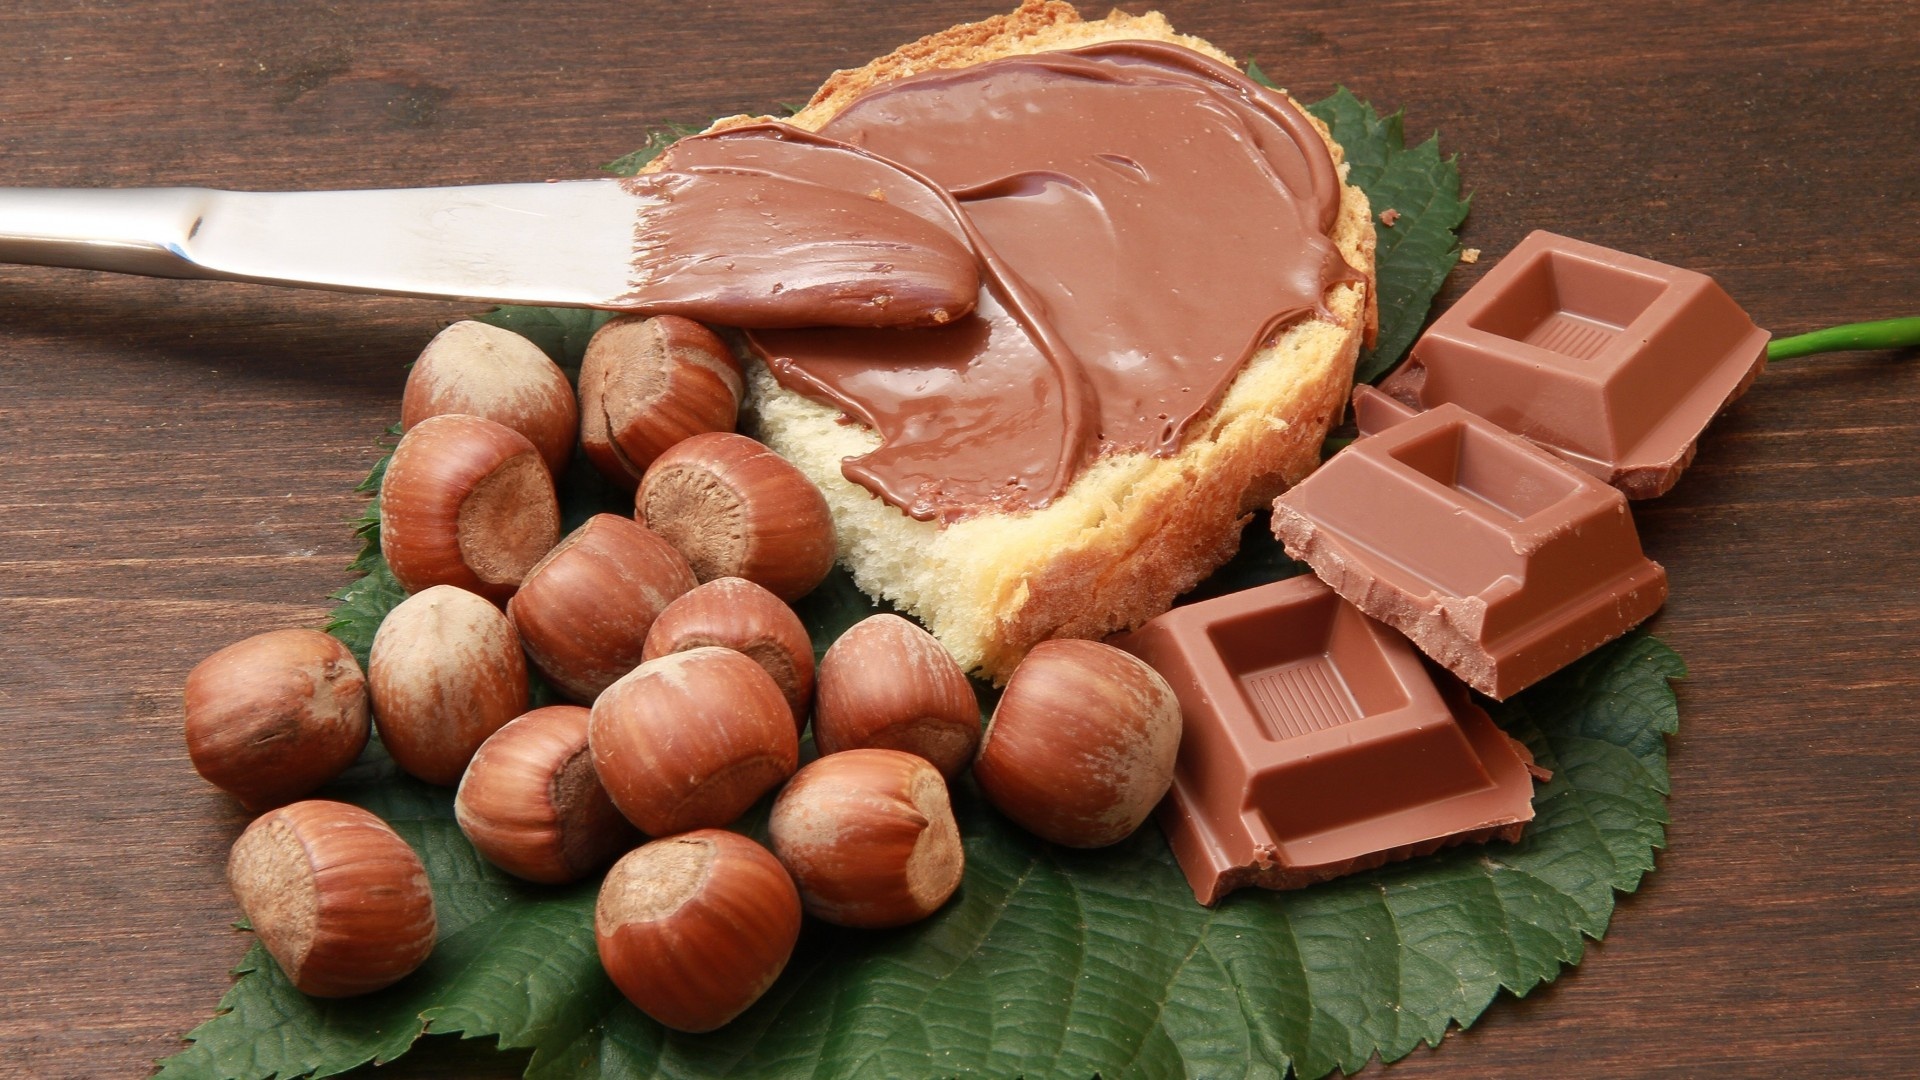 Hazelnuts: Nutella is a popular industrial cream made of filberts. 1920x1080 Full HD Background.